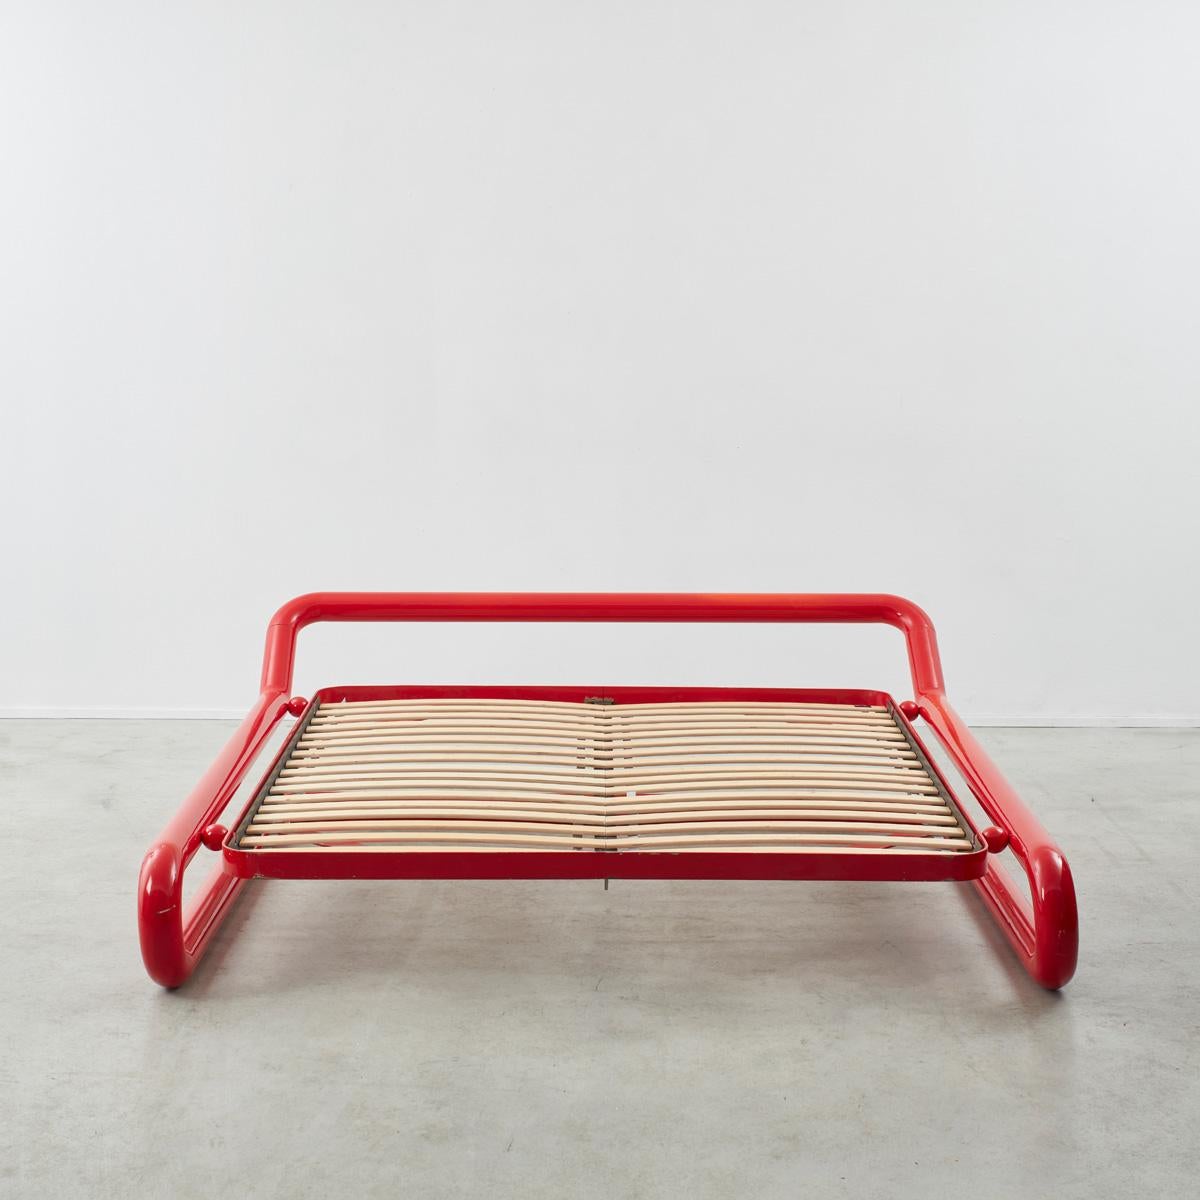 Modern Marzio Cecchi cantilevered bed frame for Studio Most, Italy, 1960s For Sale